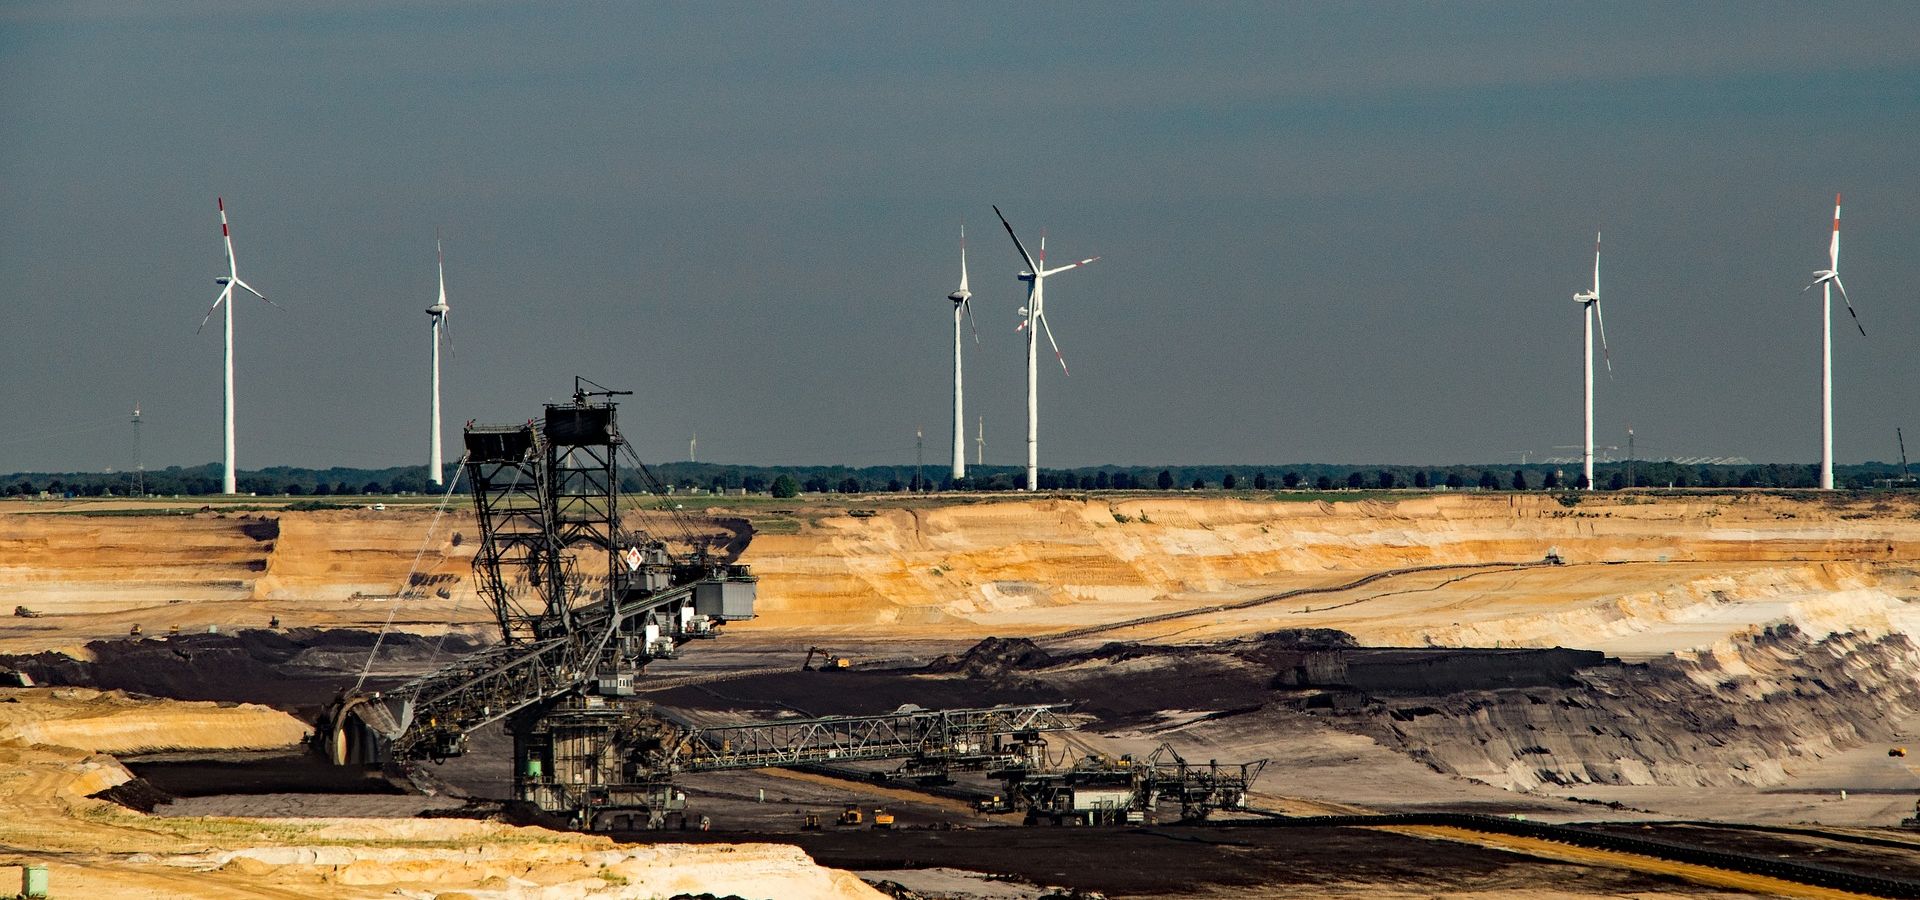 In concrete terms, Greenpeace Energy proposes to decommission the Hambach opencast mine and the six oldest and least efficient power plant units by 2020, the nearby Inden mine in 2022 along with six further power plant units, and in 2025 close the Garzweiler Mine along with the last three lignite burning units.